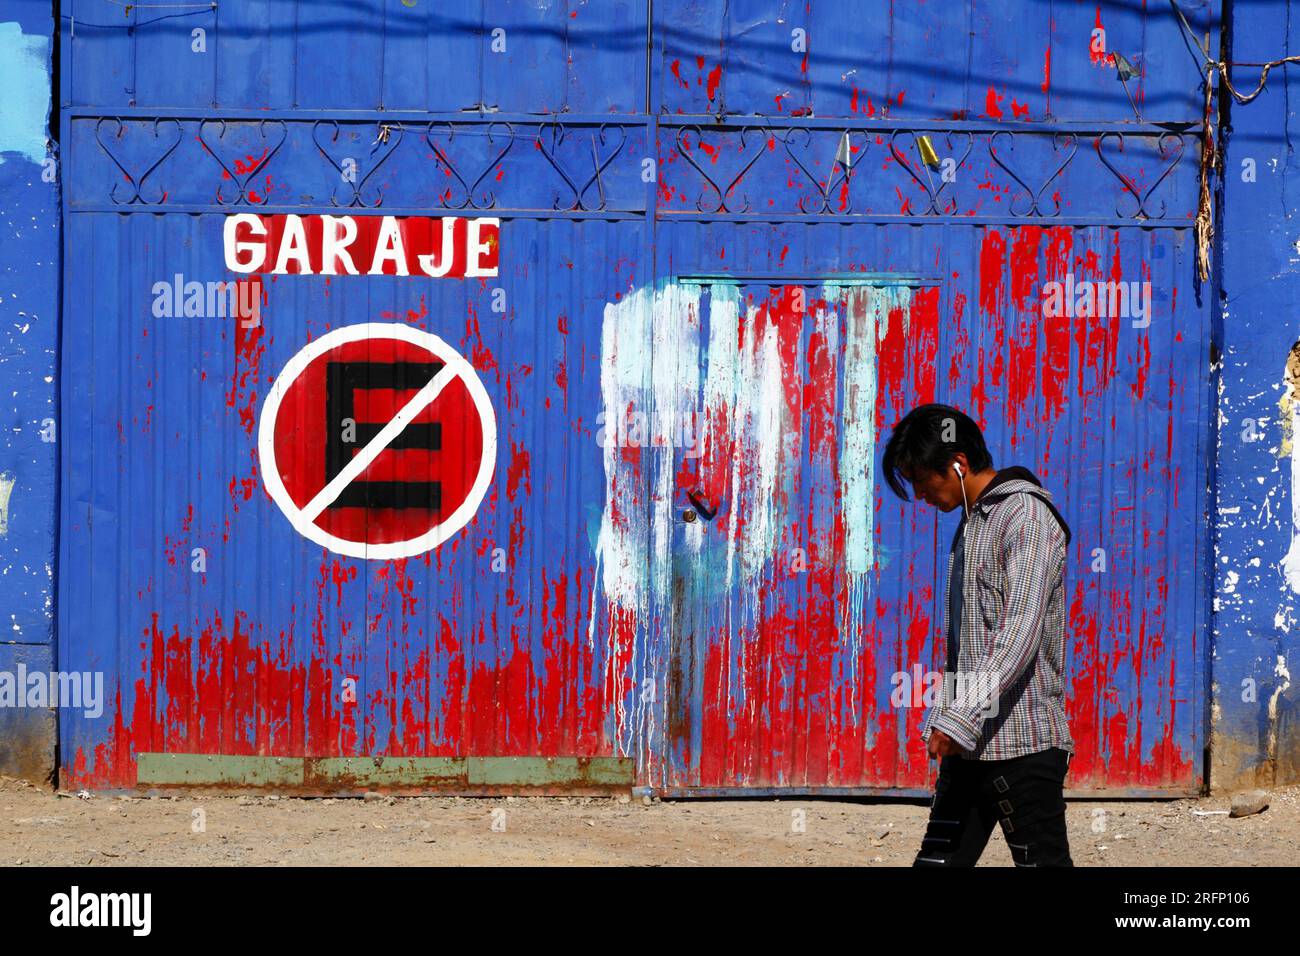 Youth wearing earphones walking past no parking symbol on blue and red painted metal garage doors, El Alto, Bolivia Stock Photo